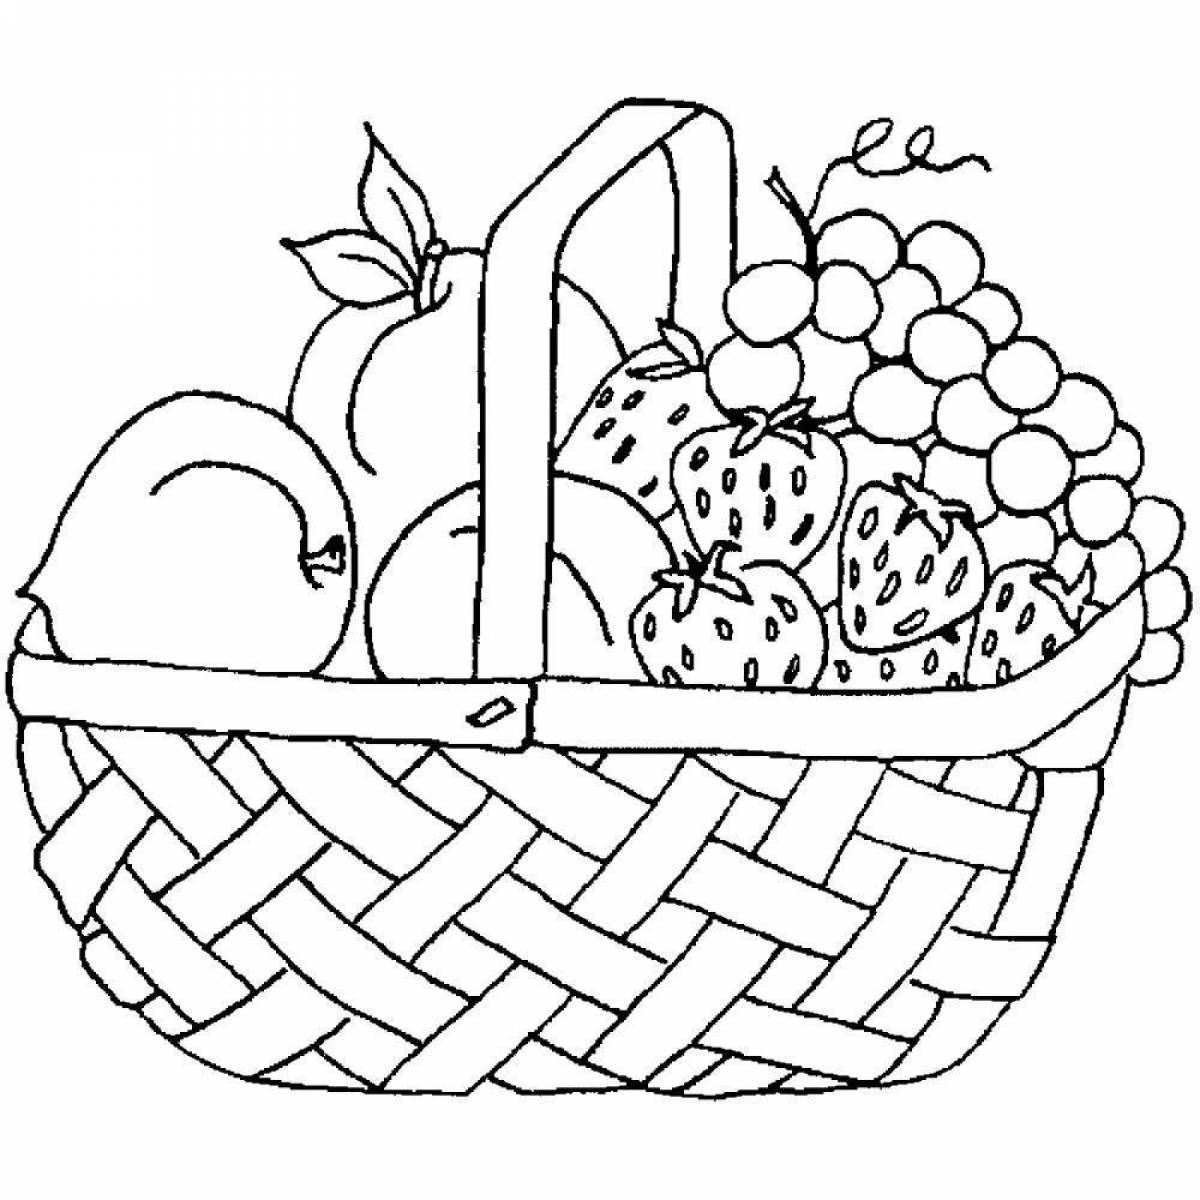 Coloring book luminous still life with fruit